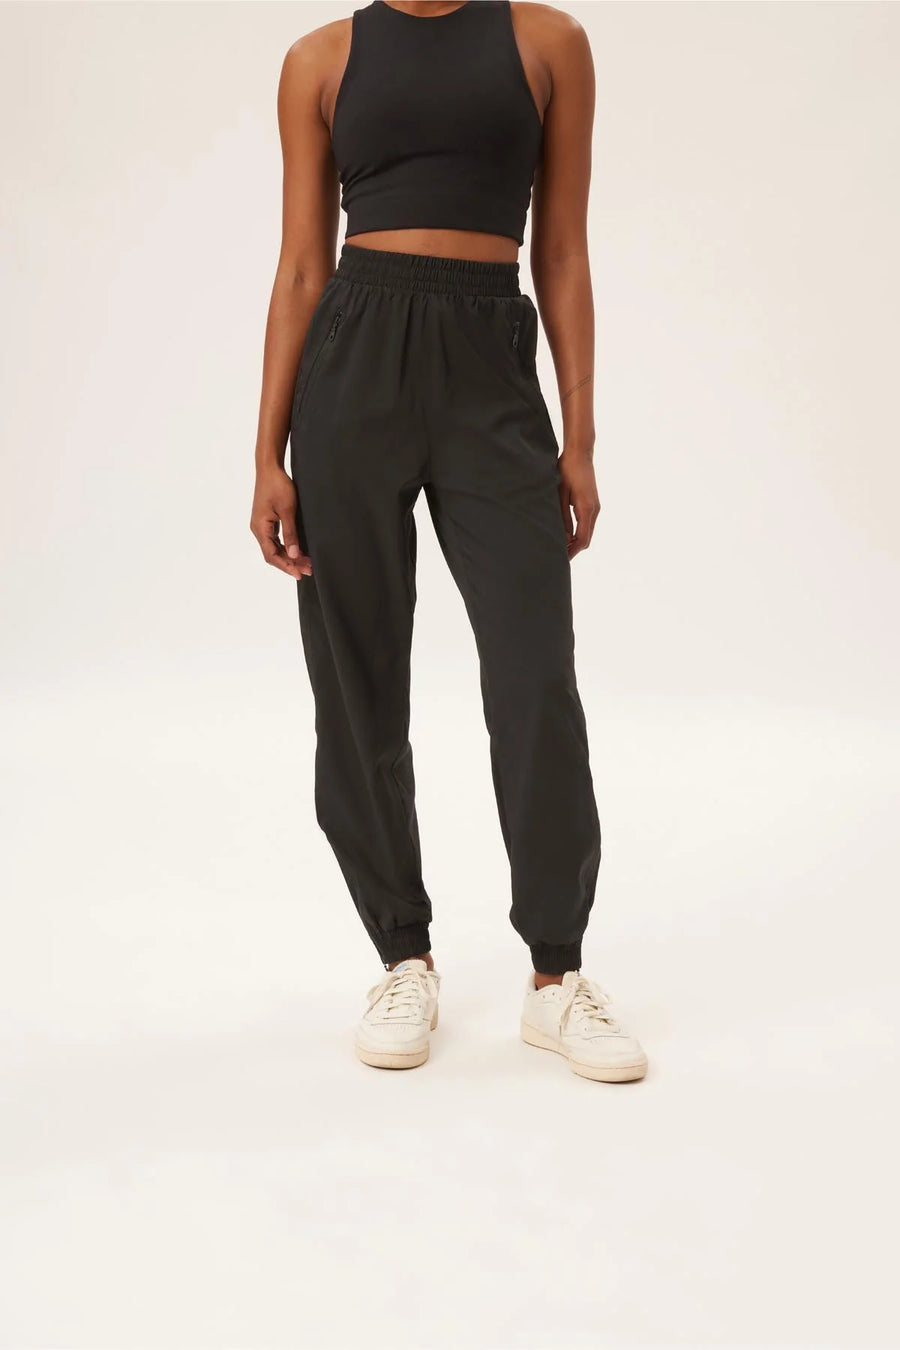 Summit recycled shell Track Pant, Girlfriend Collective